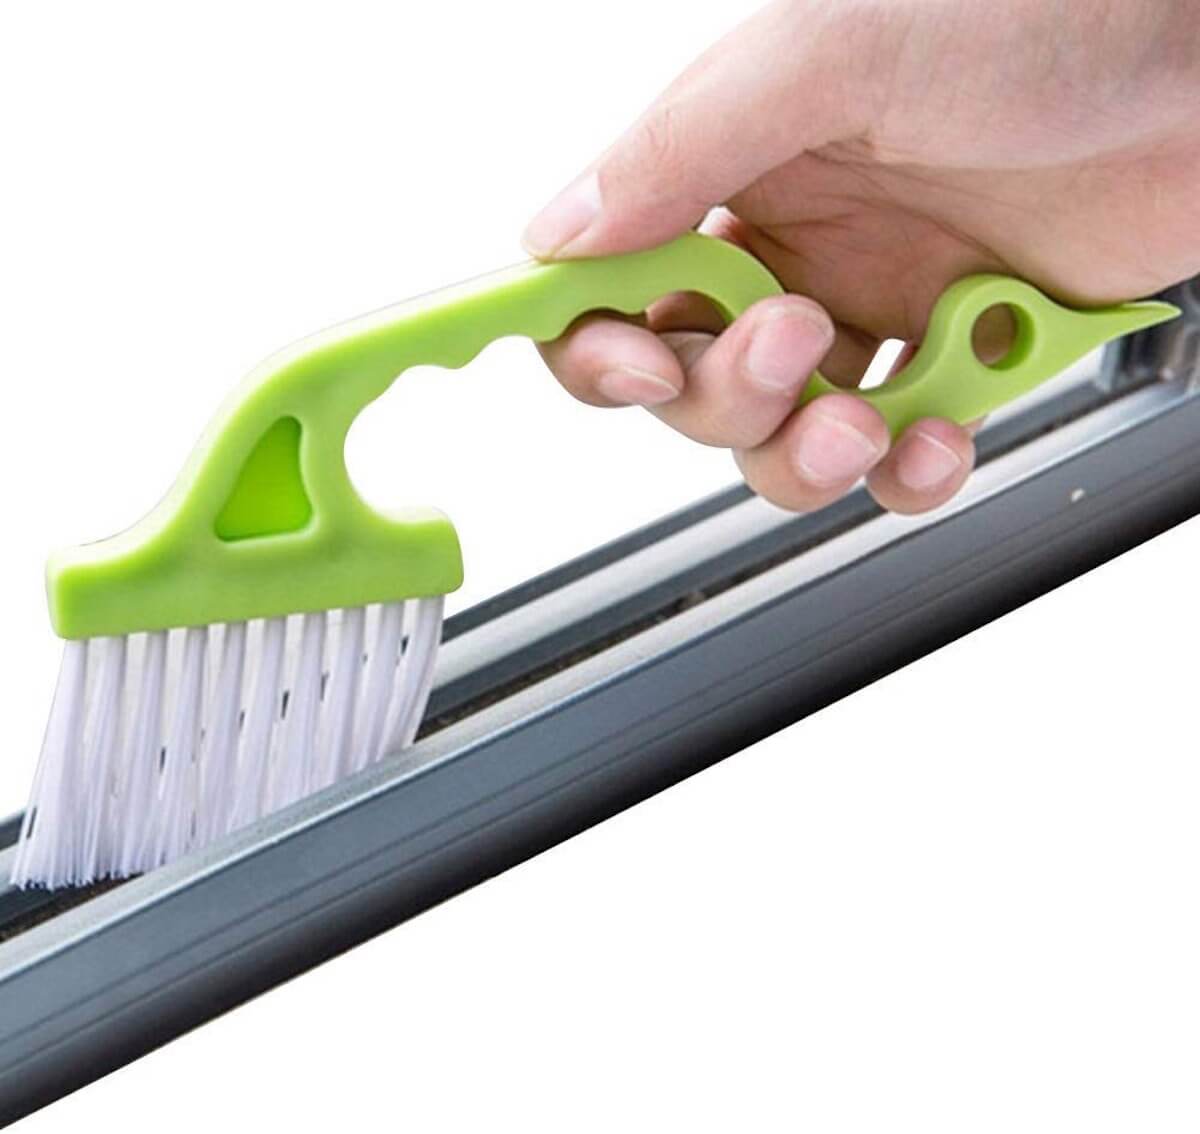 Groove cleaning tool